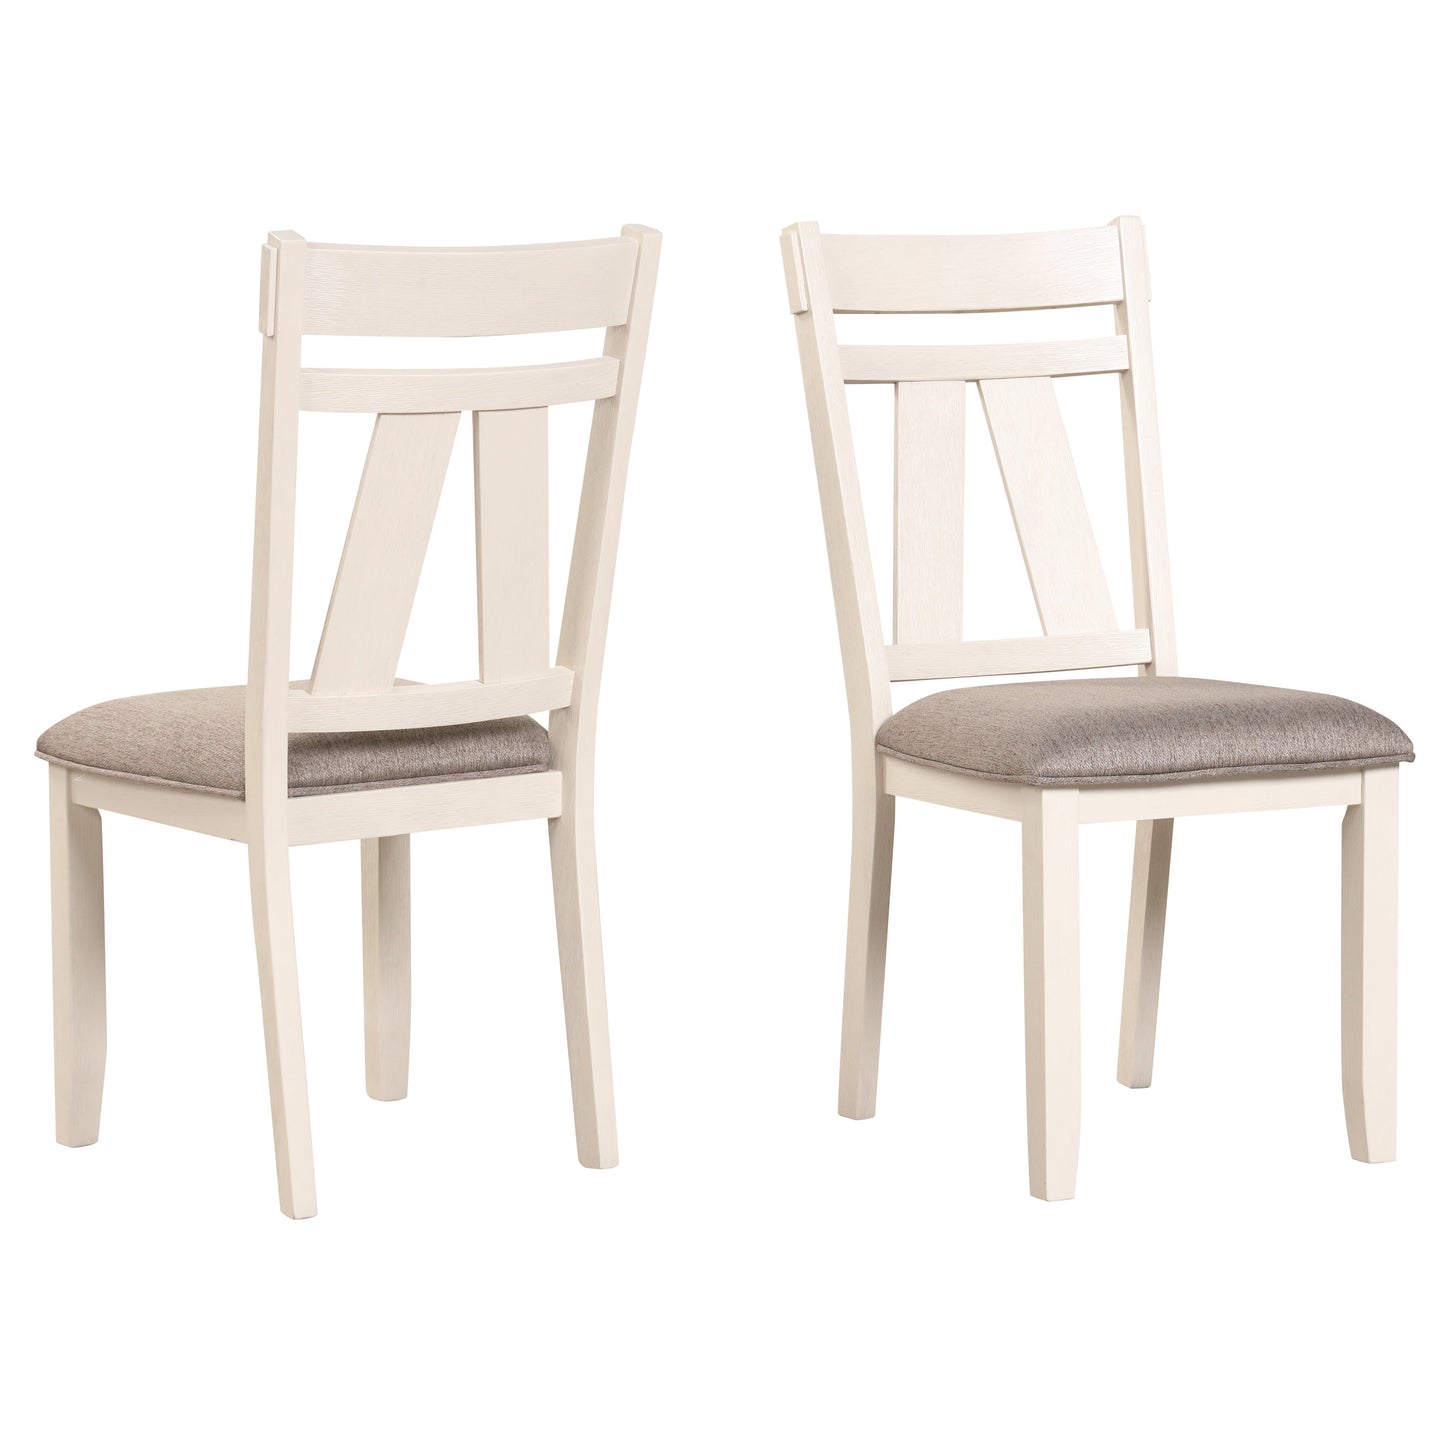 Roundhill Furniture Fasena Off White Solid Wood Slat Back Upholstered Dining Chairs, Set of 2